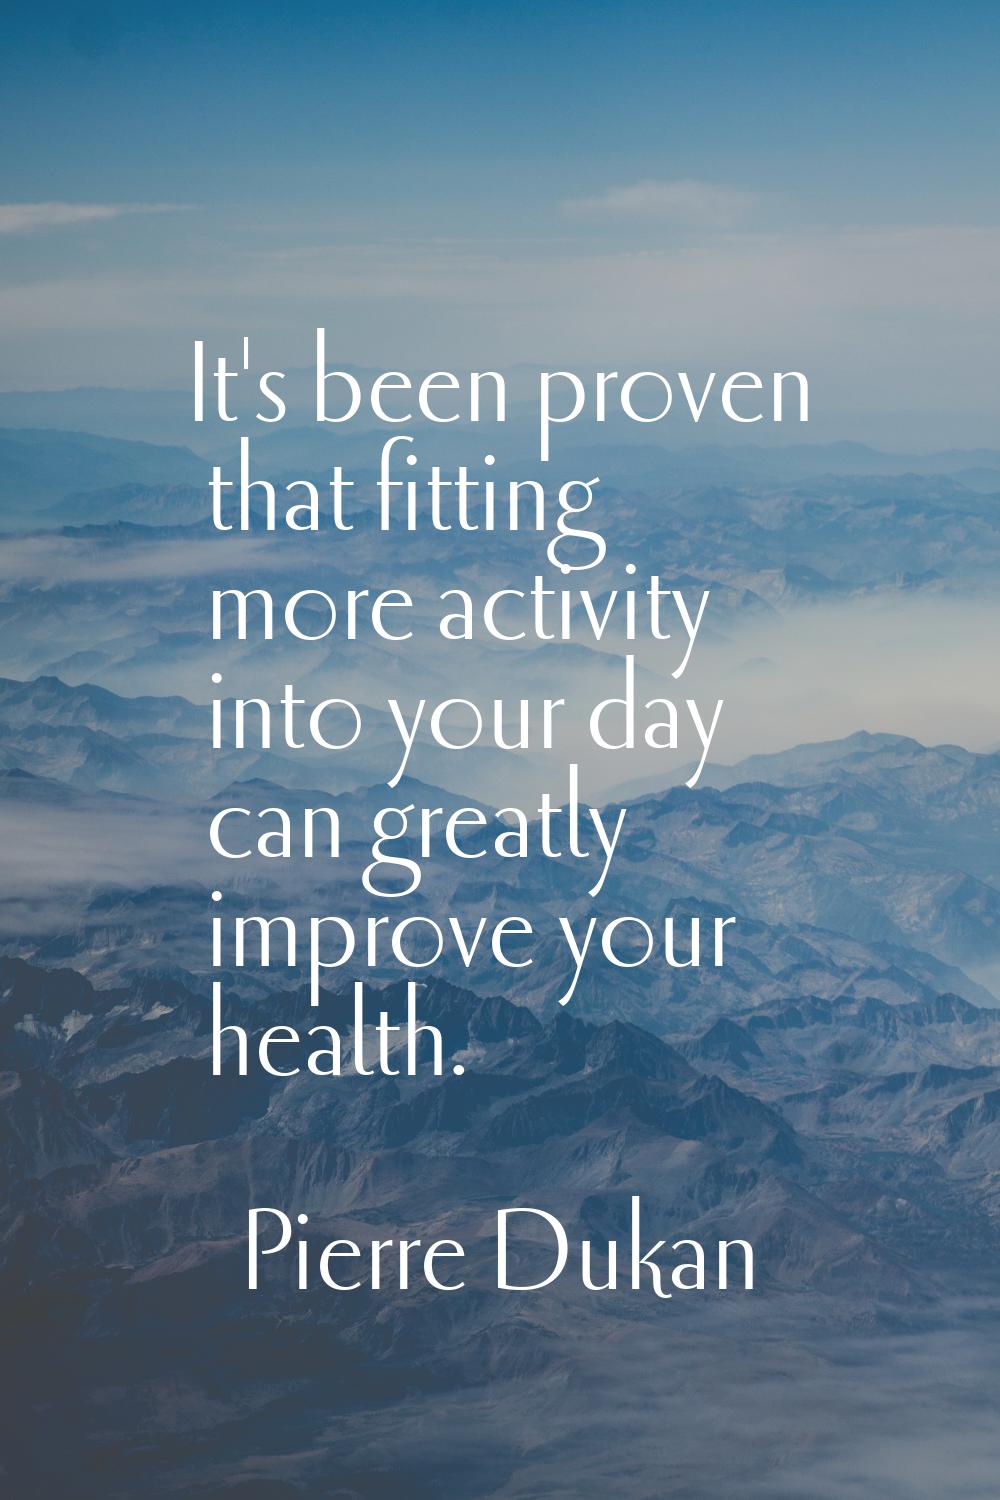 It's been proven that fitting more activity into your day can greatly improve your health.